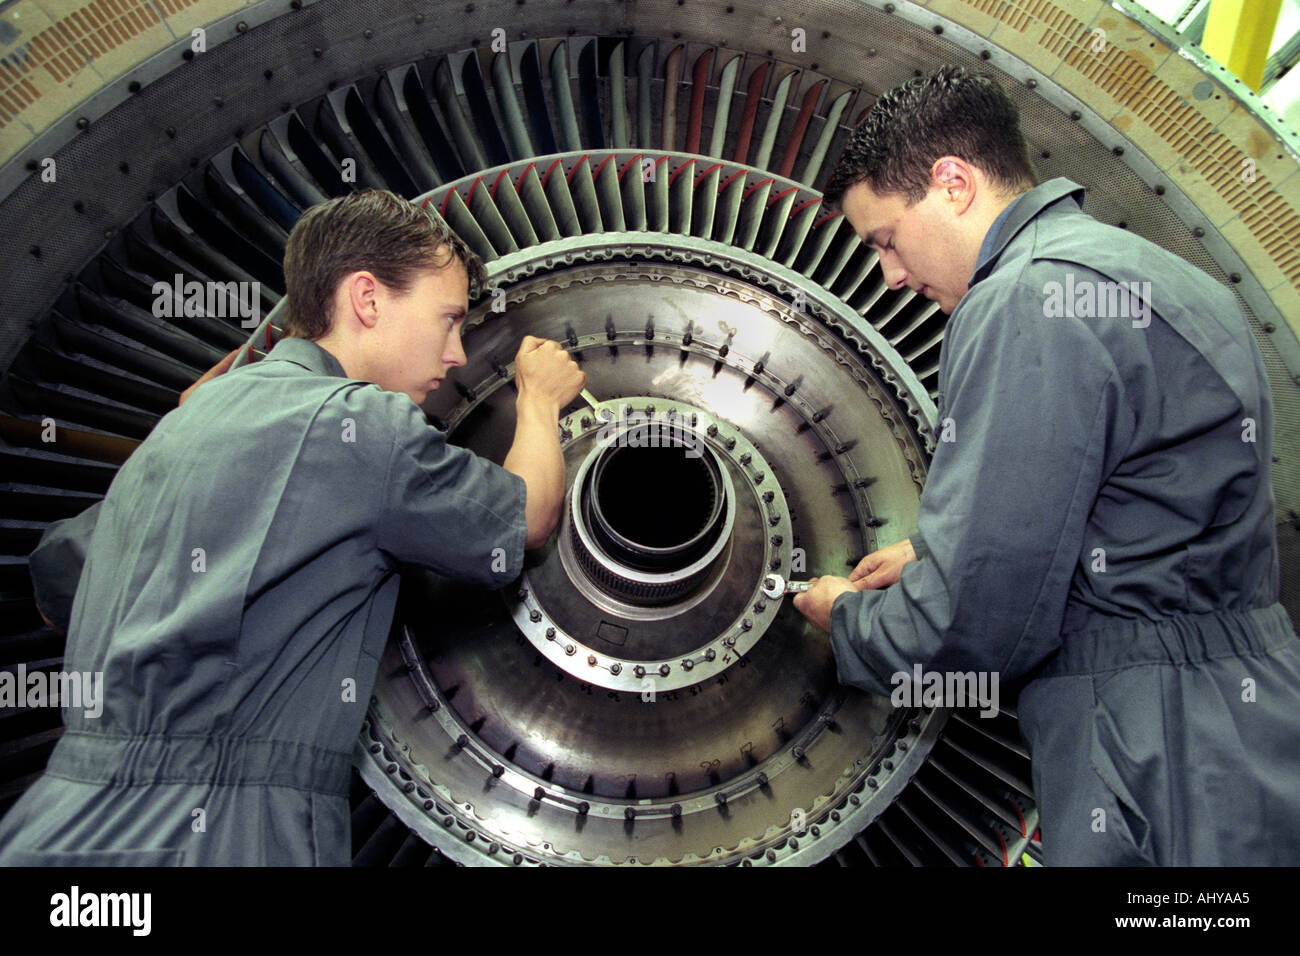 Modern Apprentices working on an aircraft jet engine UK Stock Photo